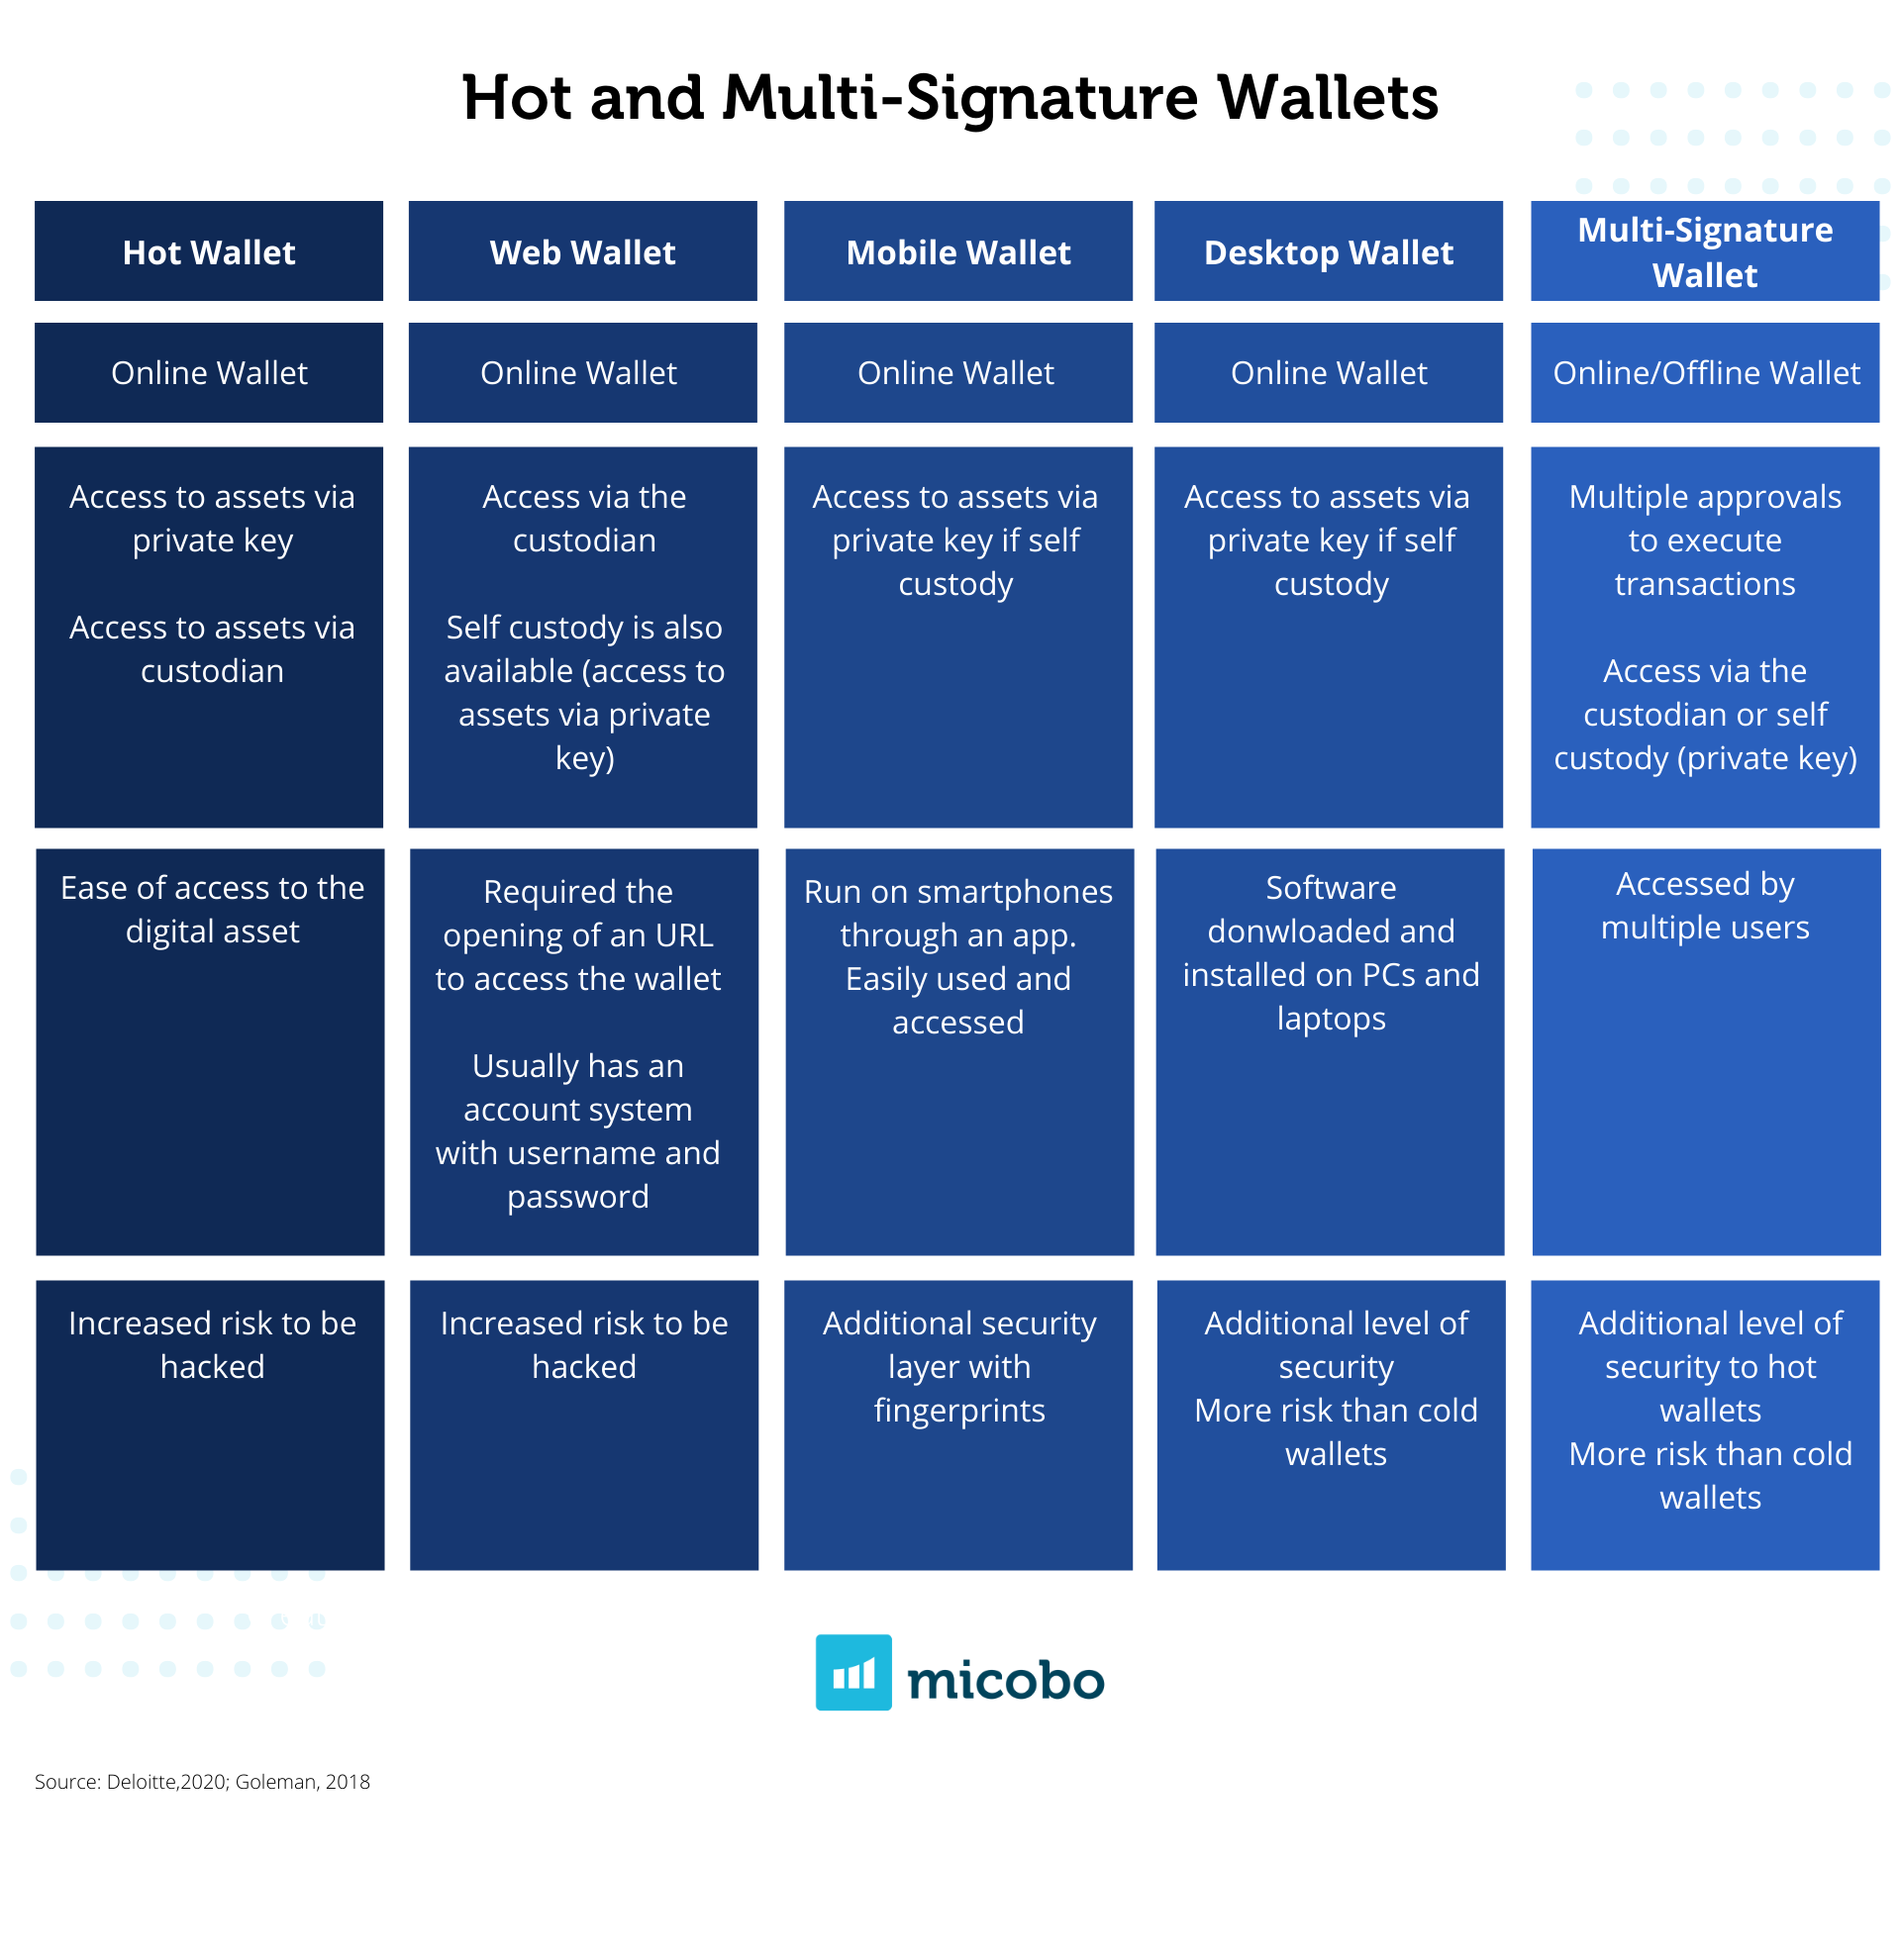 Hot and Multi-Signature Wallets